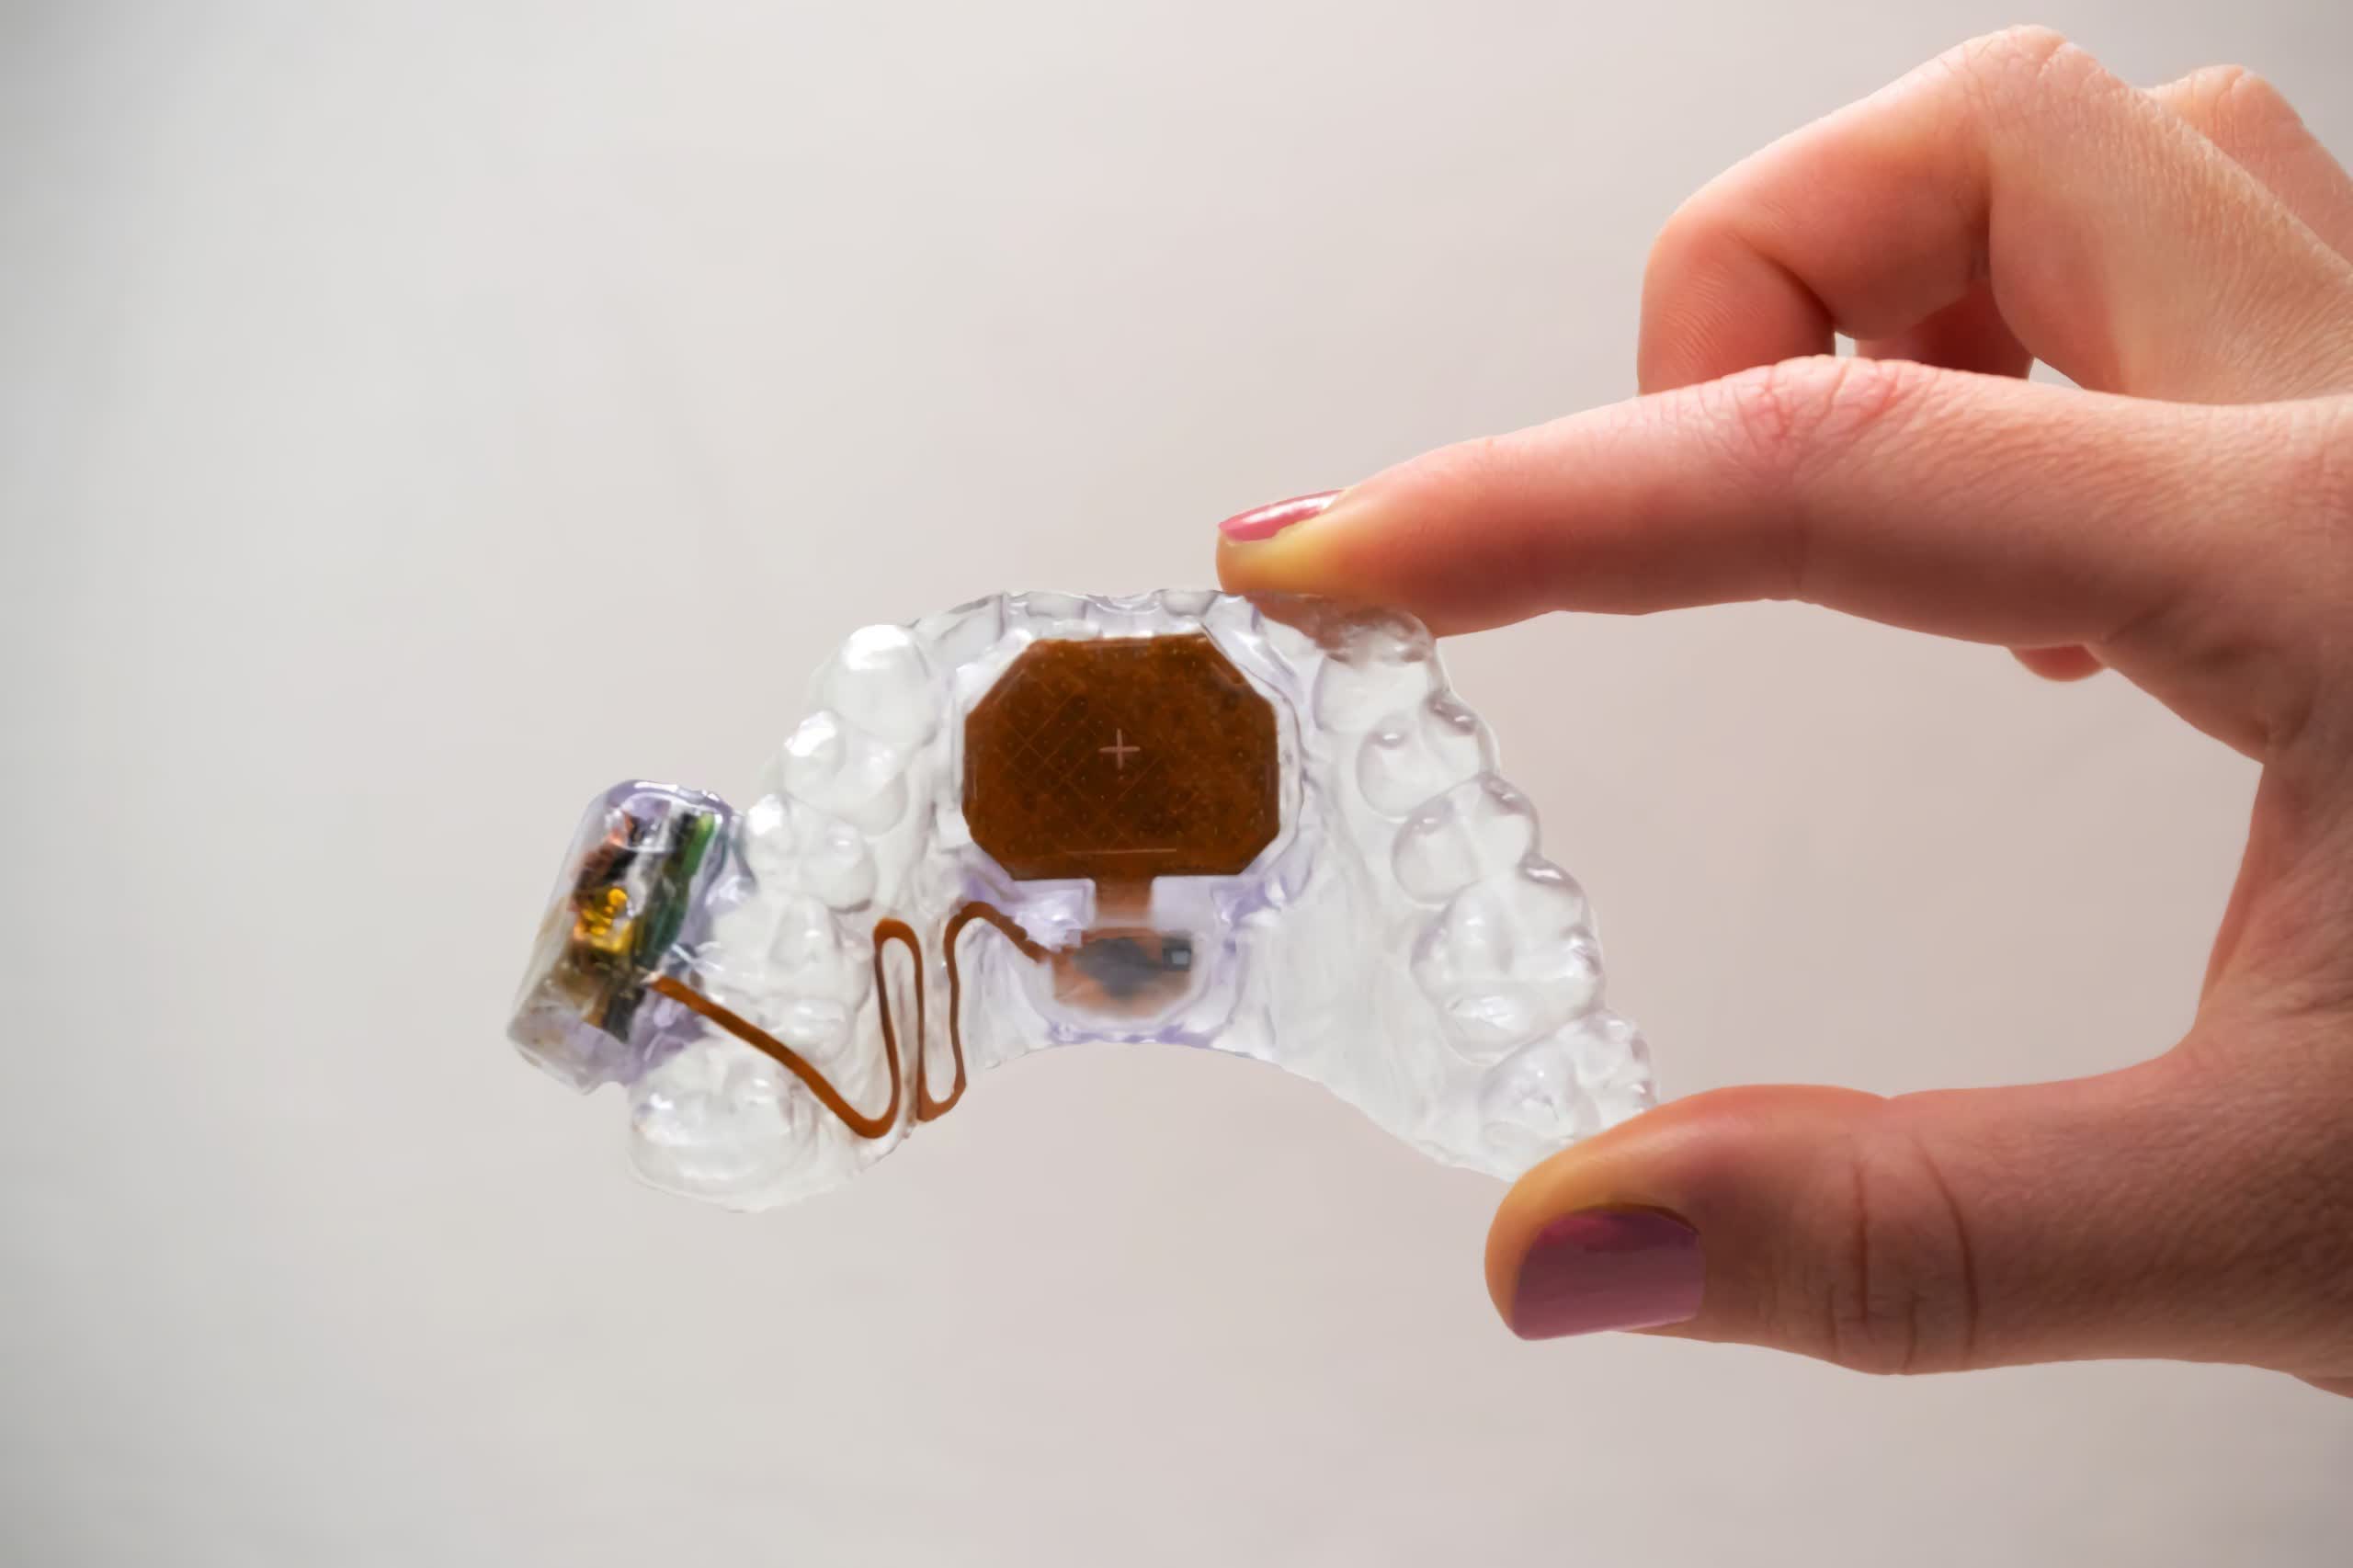 The MouthPad allows users to control a computer or mobile device with their tongue